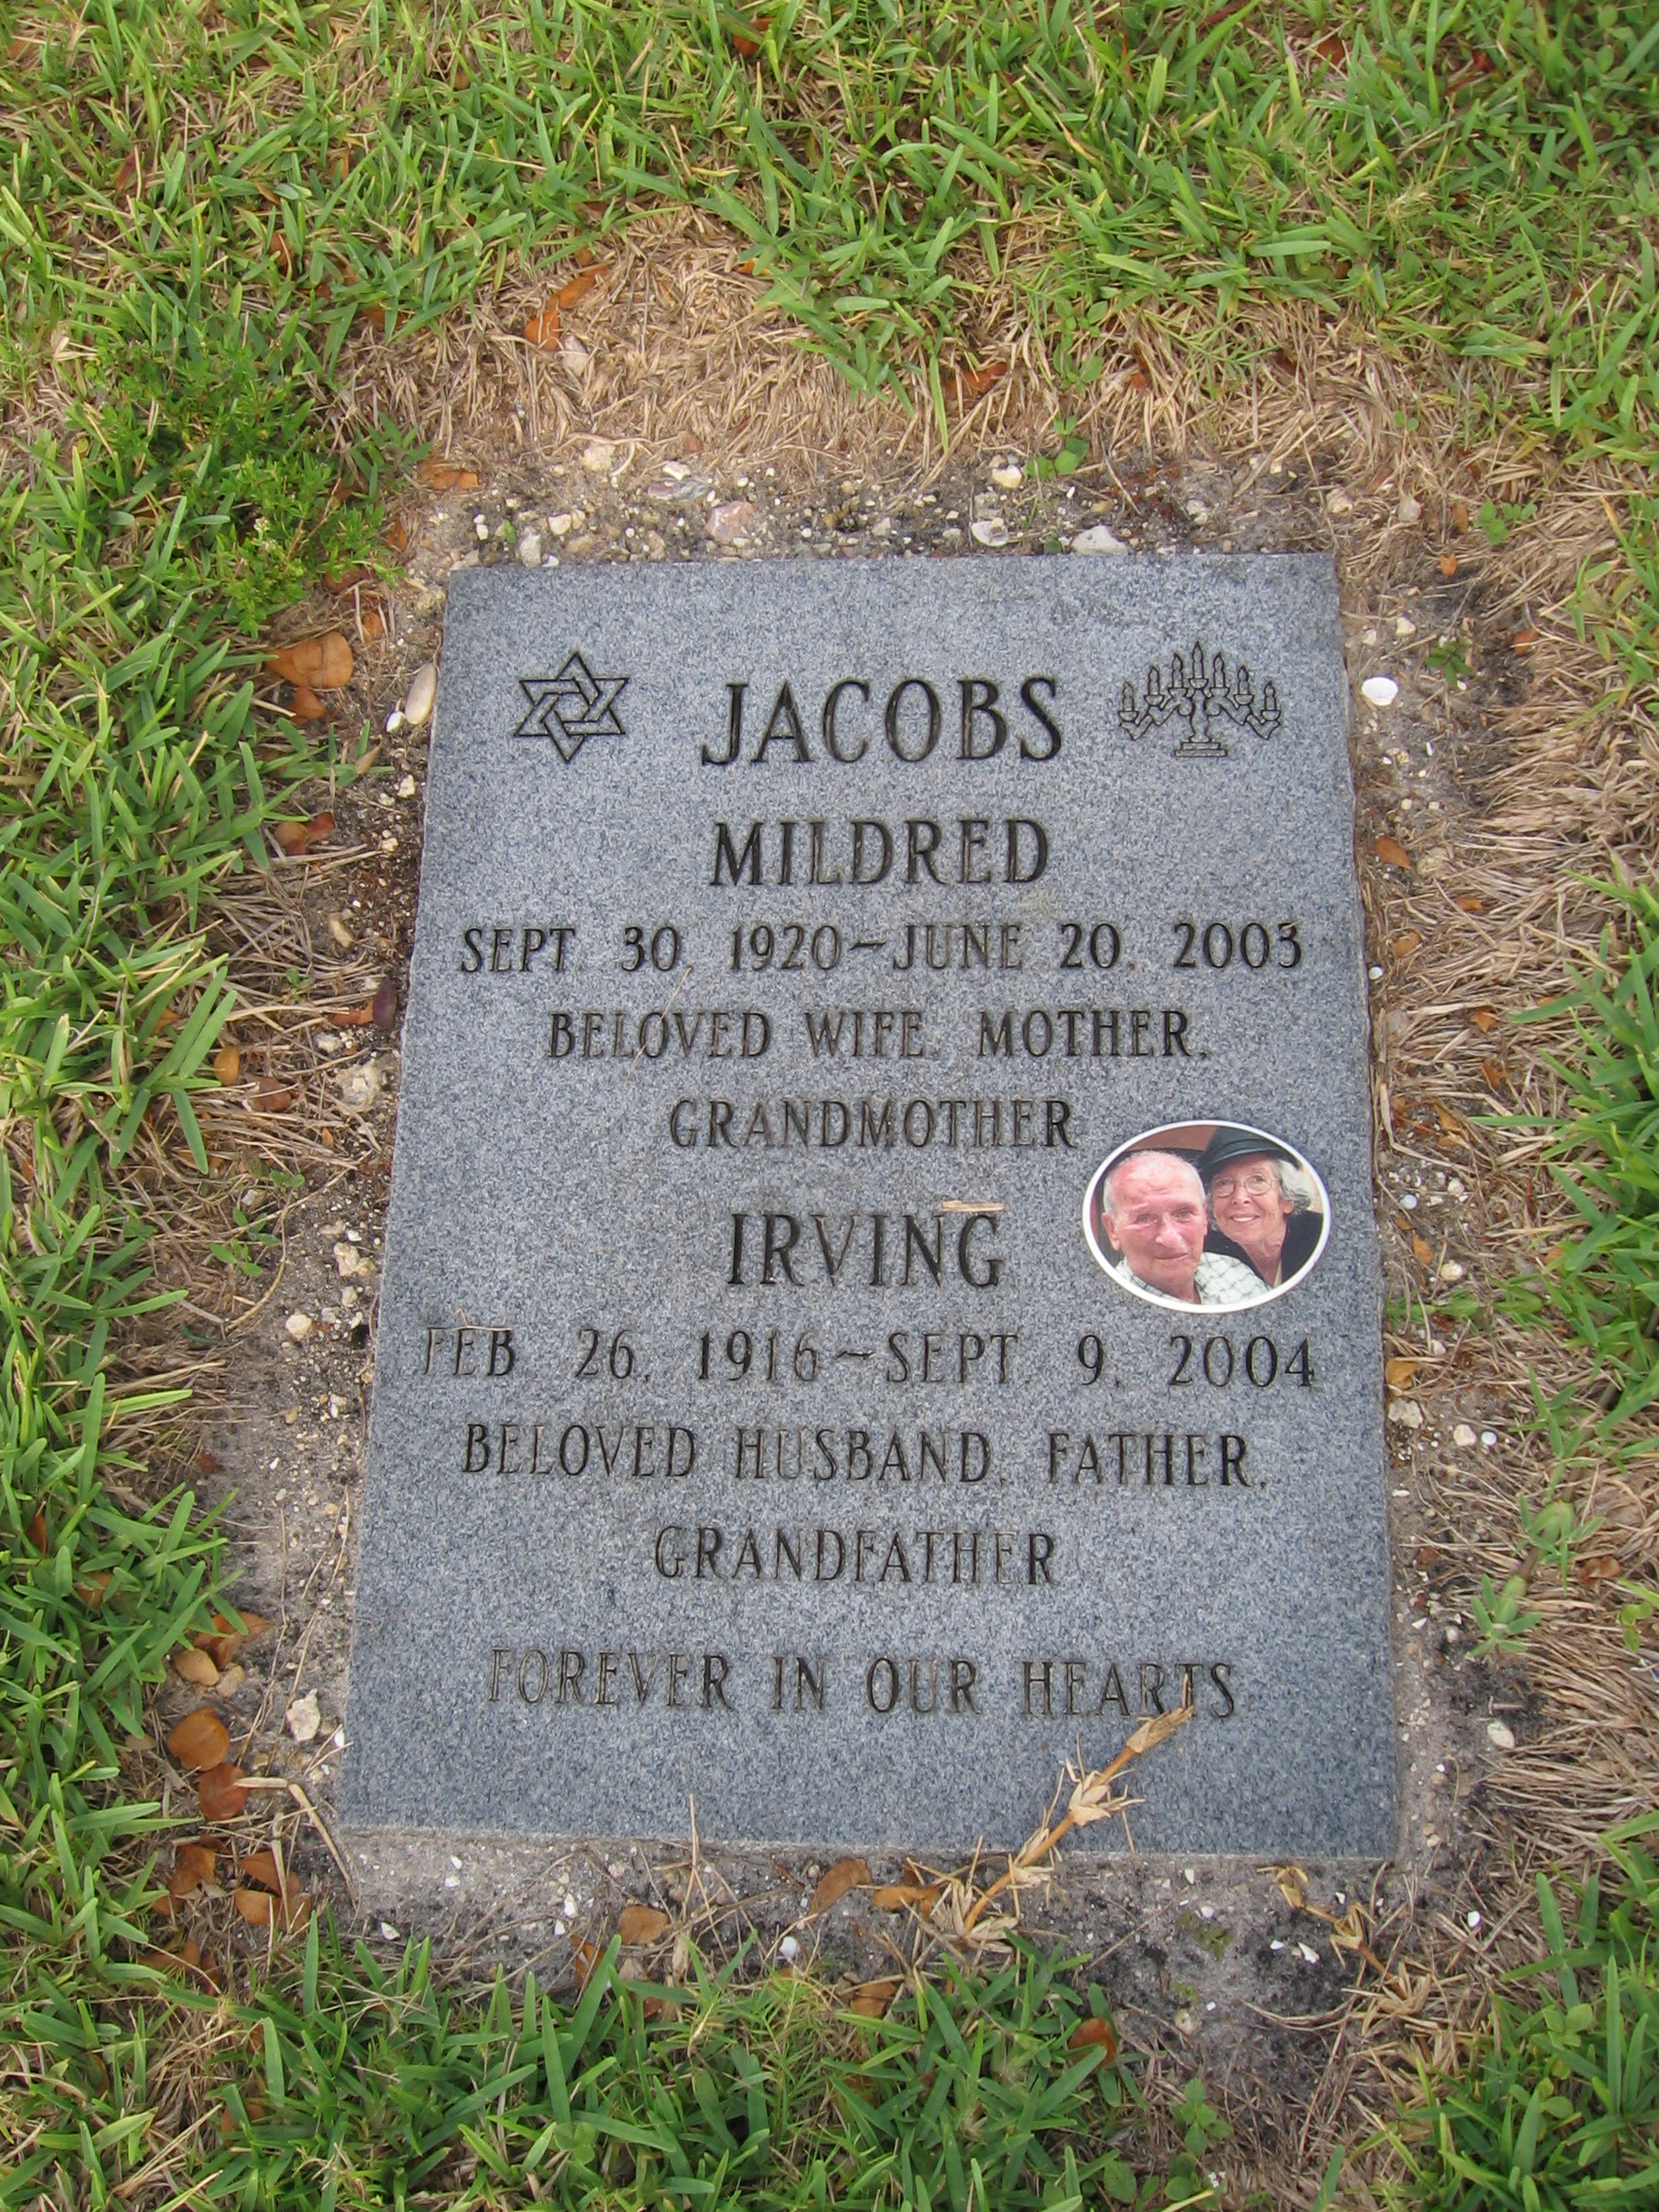 Irving Jacobs